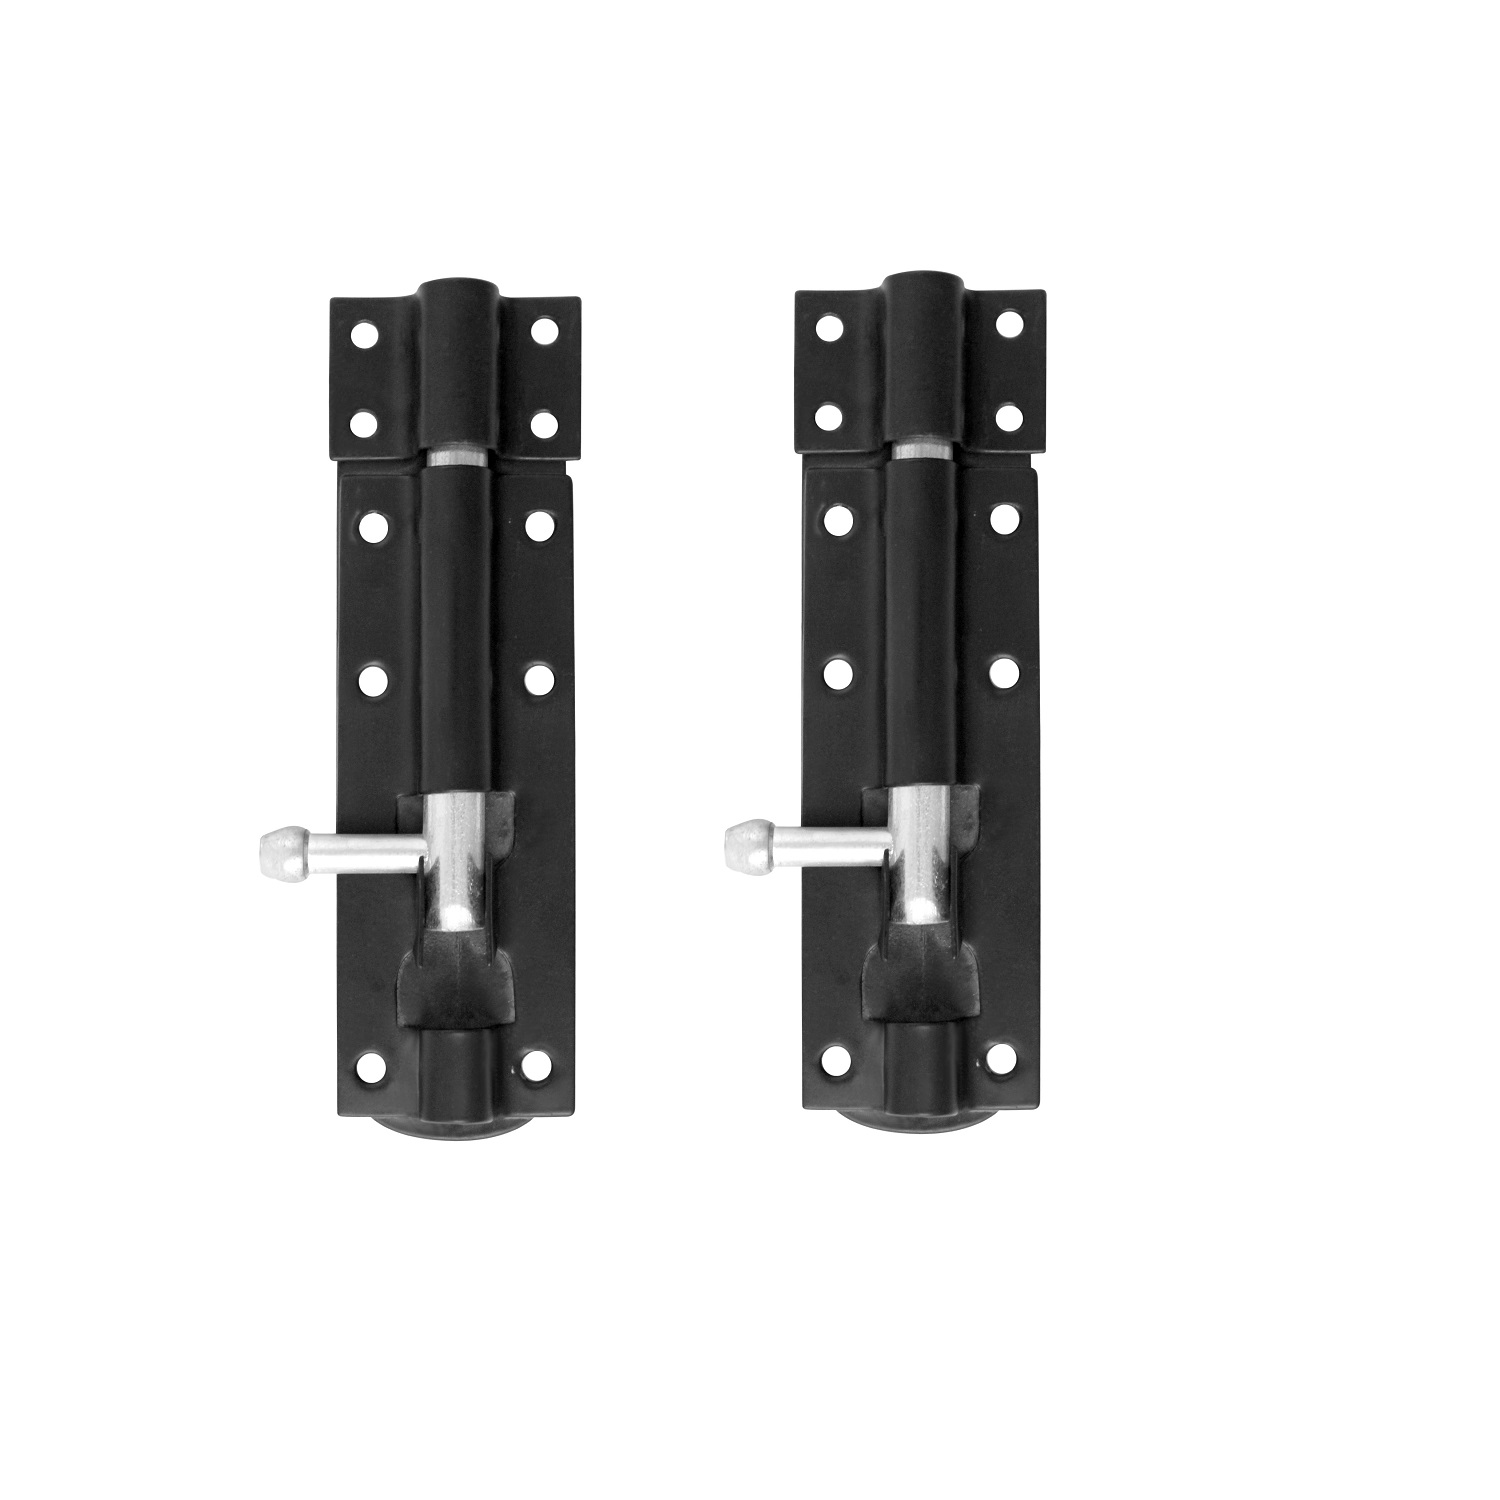 Tower Bolt 8 Inches – Black Powder Coated